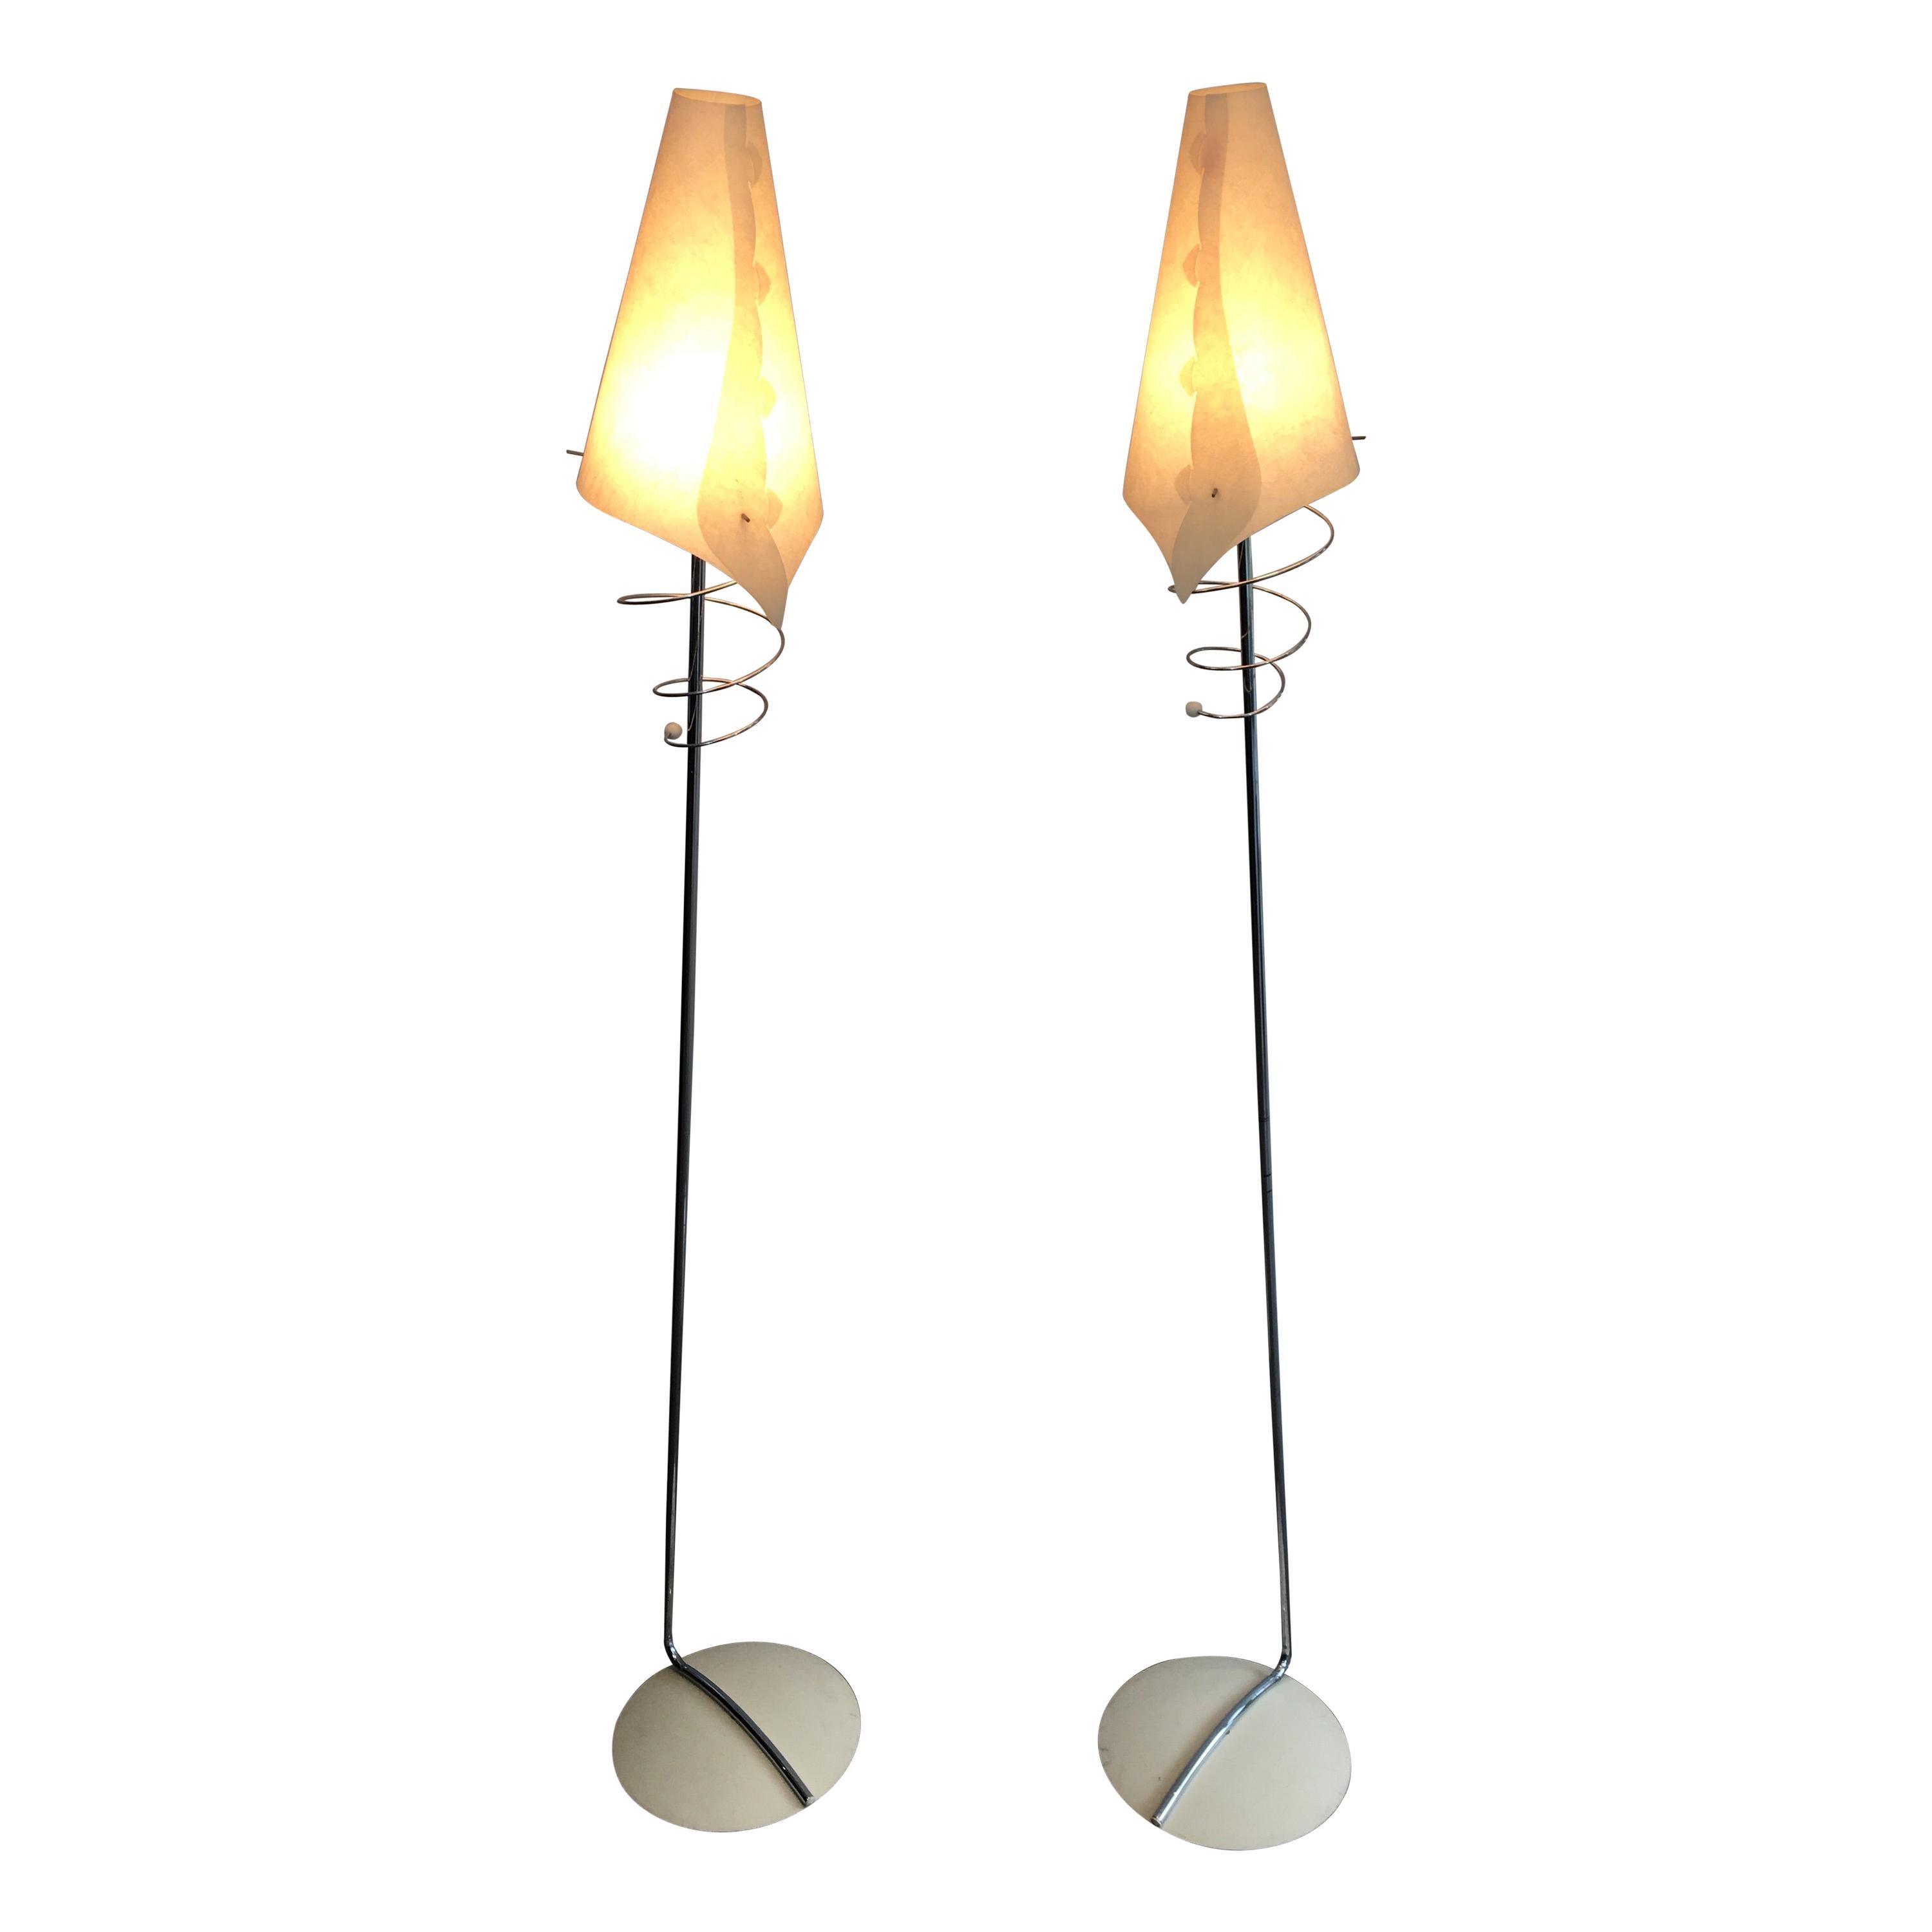 Pair of Design Floor Lamps in Chrome, with White Lacquered Bases and Design